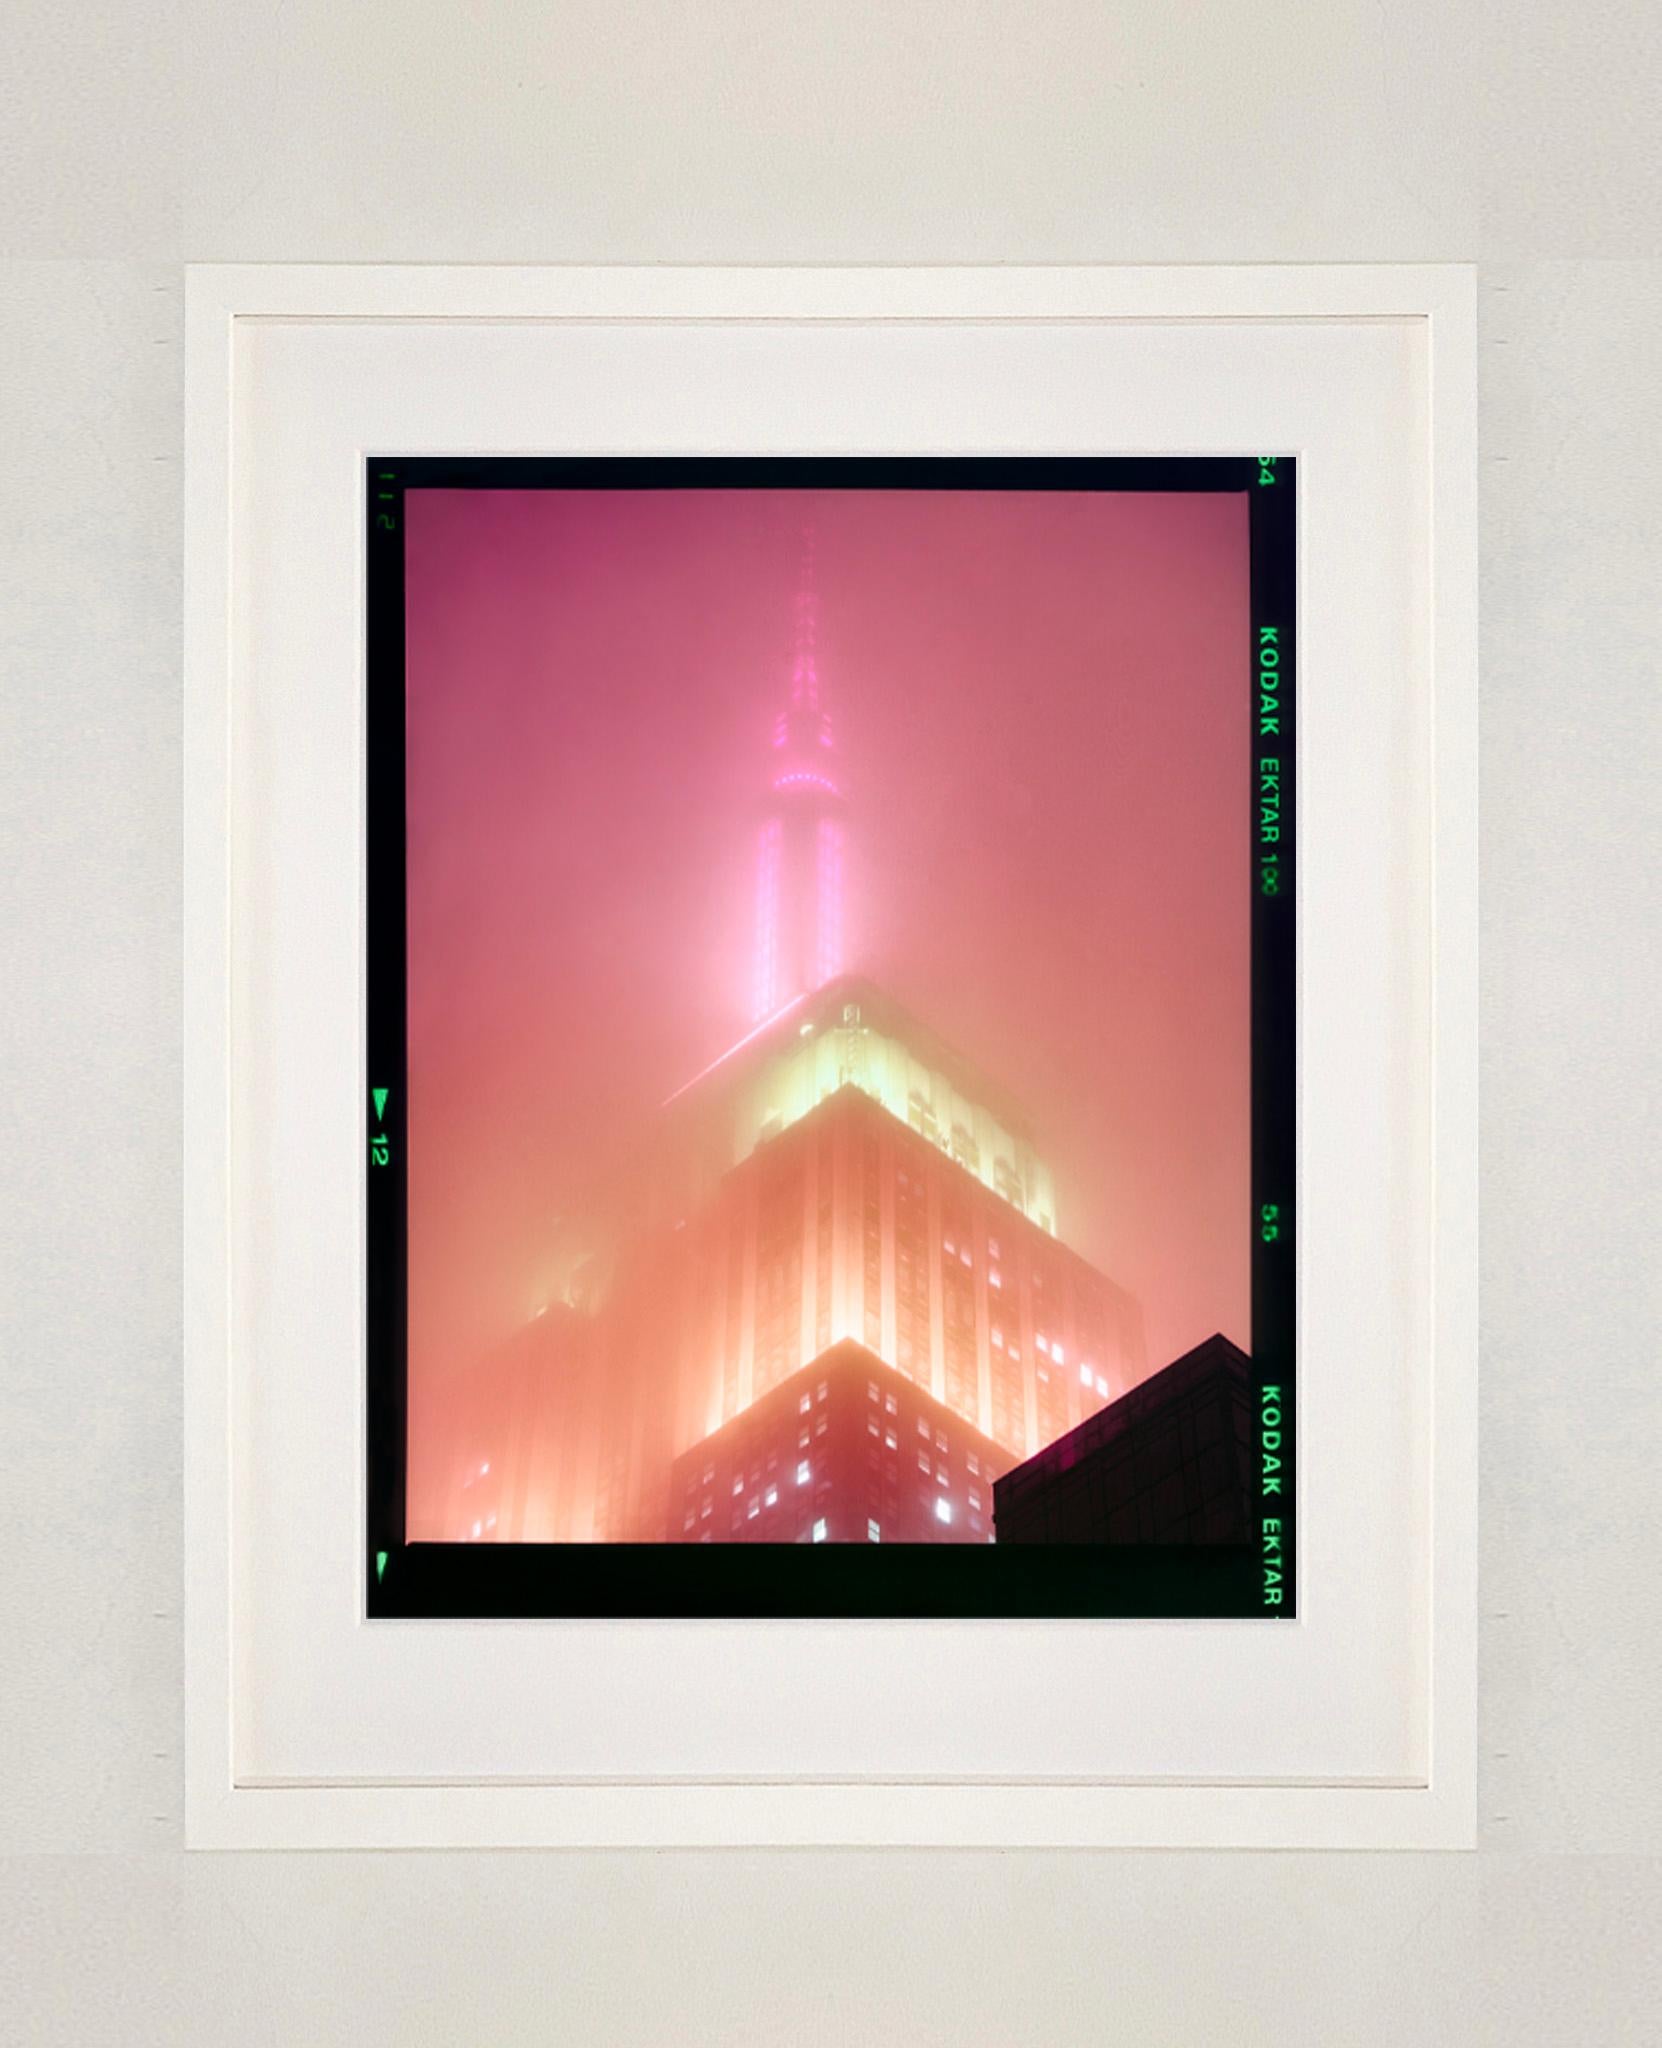 NOMAD III (Film Rebate), New York - Conceptual Architectural Color Photography - Contemporary Print by Richard Heeps